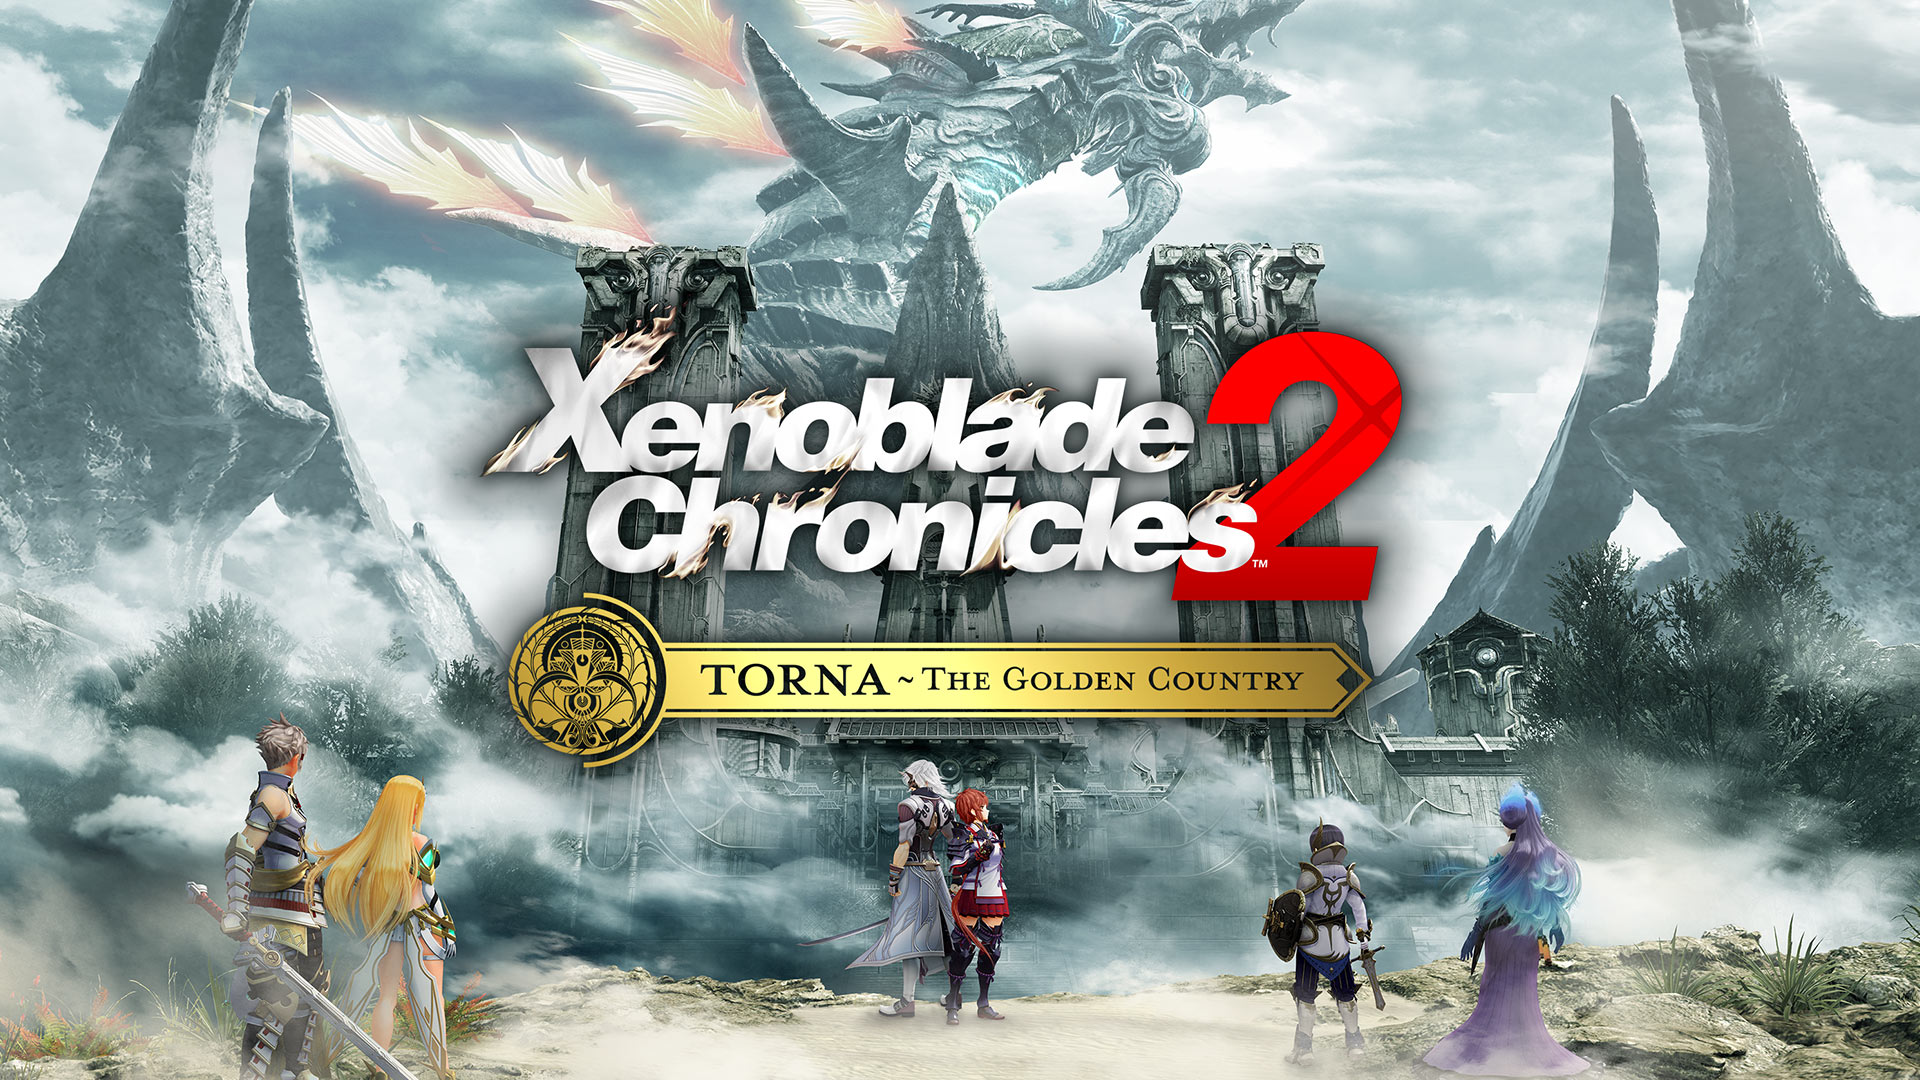 1 Cheats for Xenoblade Chronicles 2 Torna ~ The Golden Country